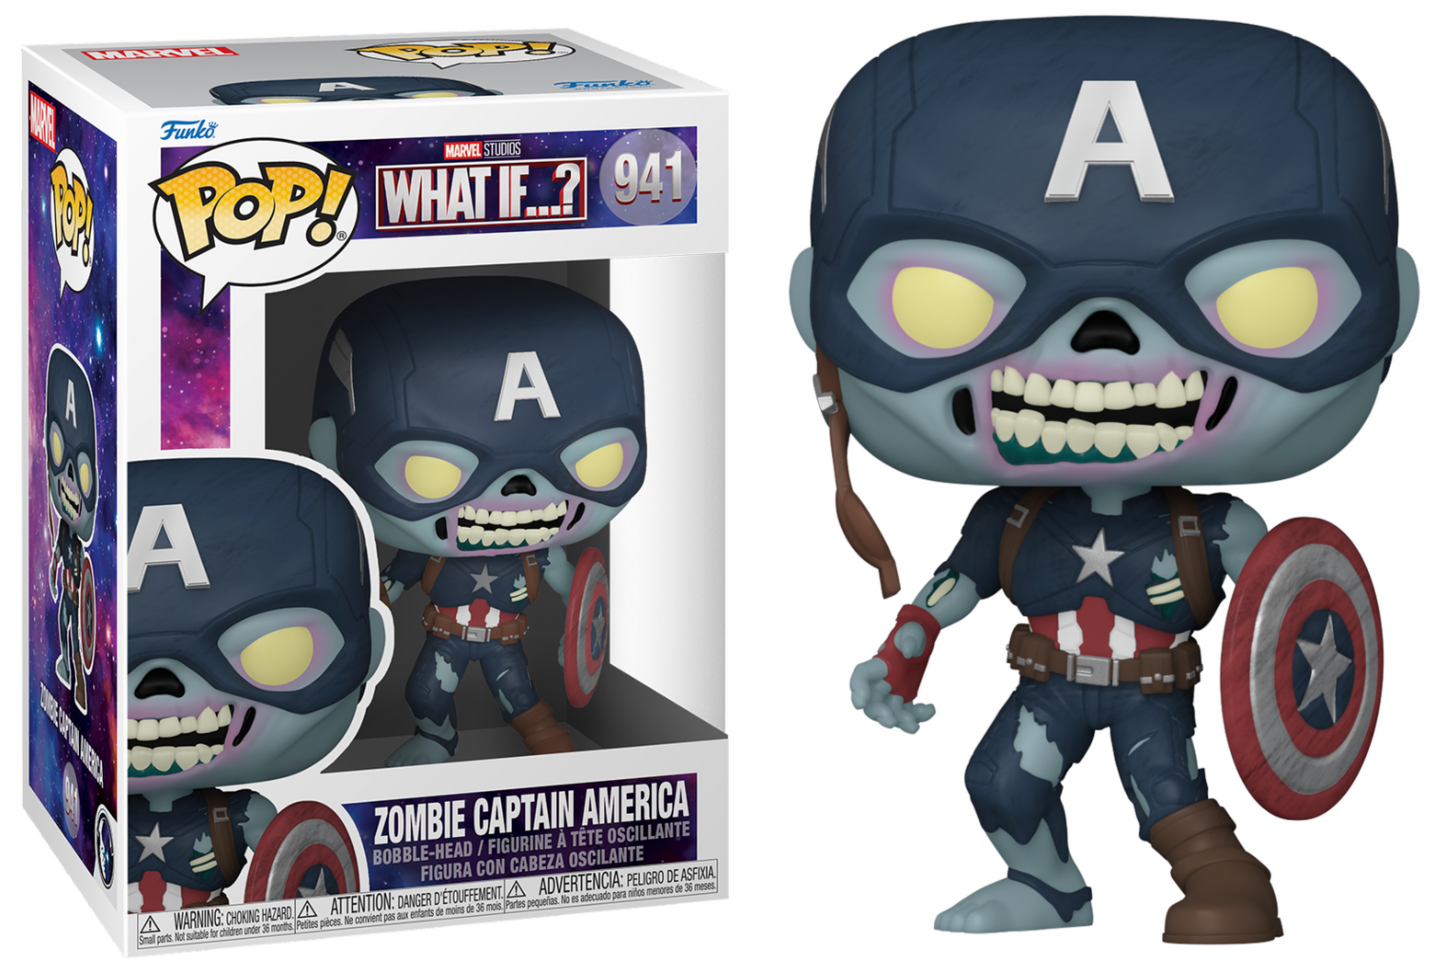 MARVEL WHAT IF - POP N° 941 - Zombie Captain America